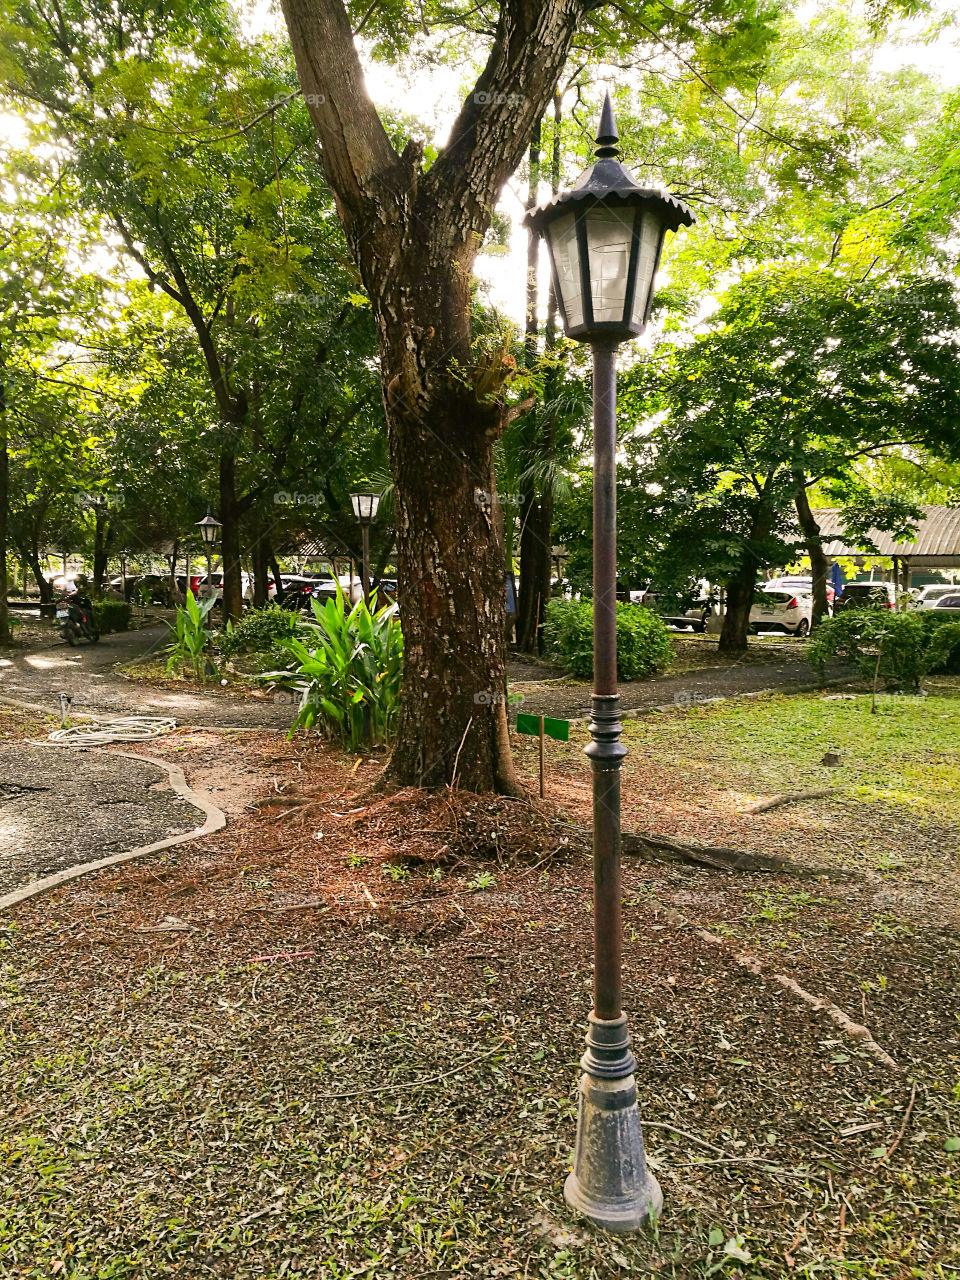 View of lamppost